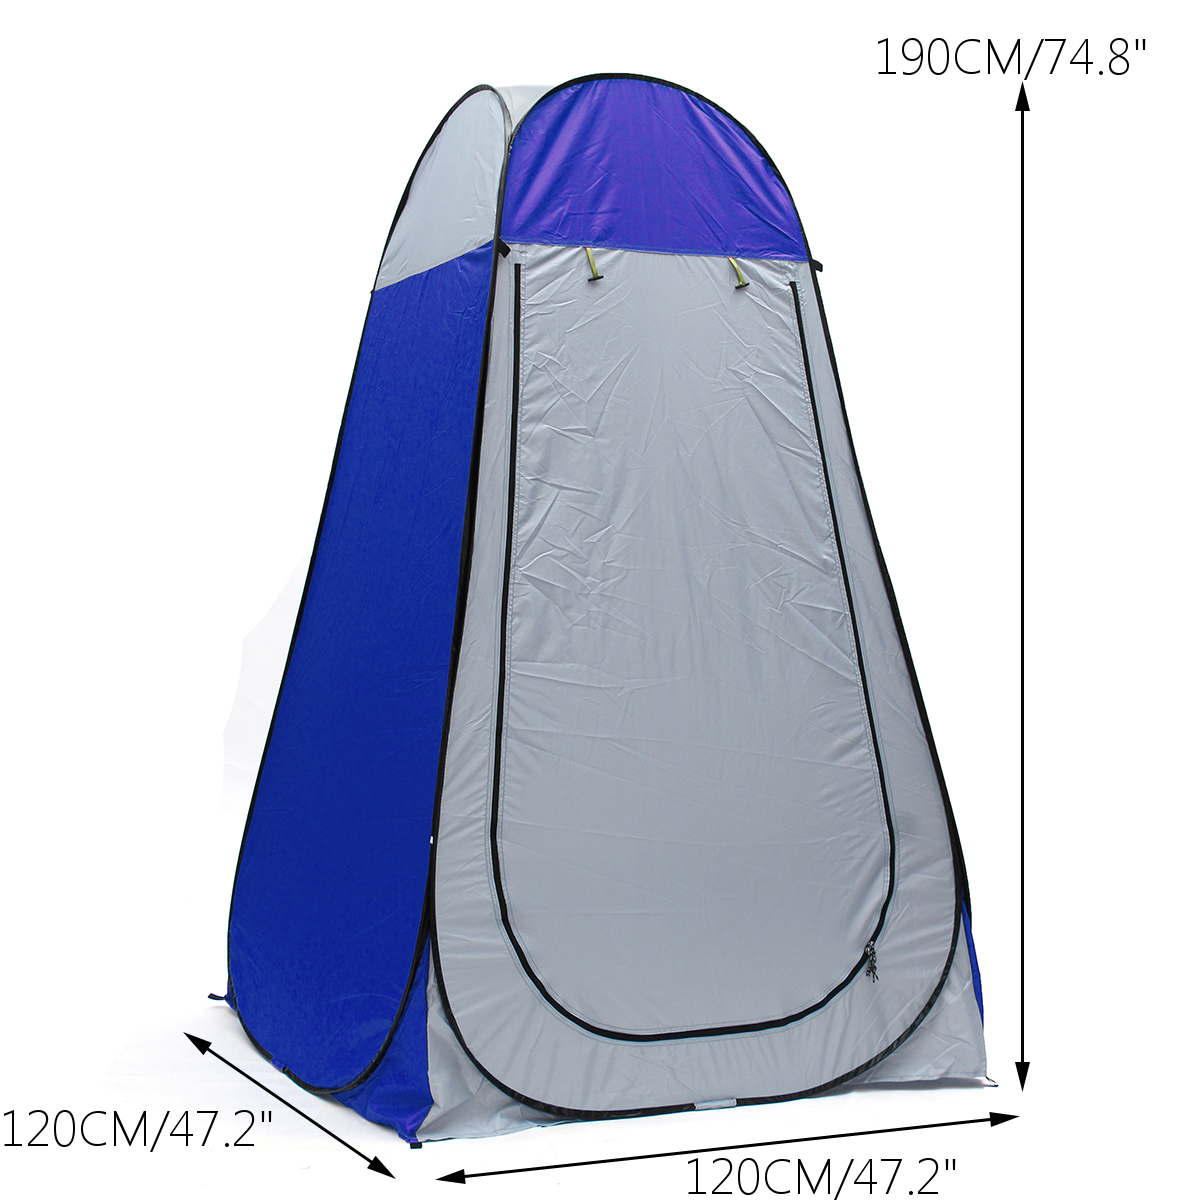 12x12x19m-Portable-Pop-up-Tent-Camping-Travel-Toilet-Shower-Room-Outdoor-Shelter-1226005